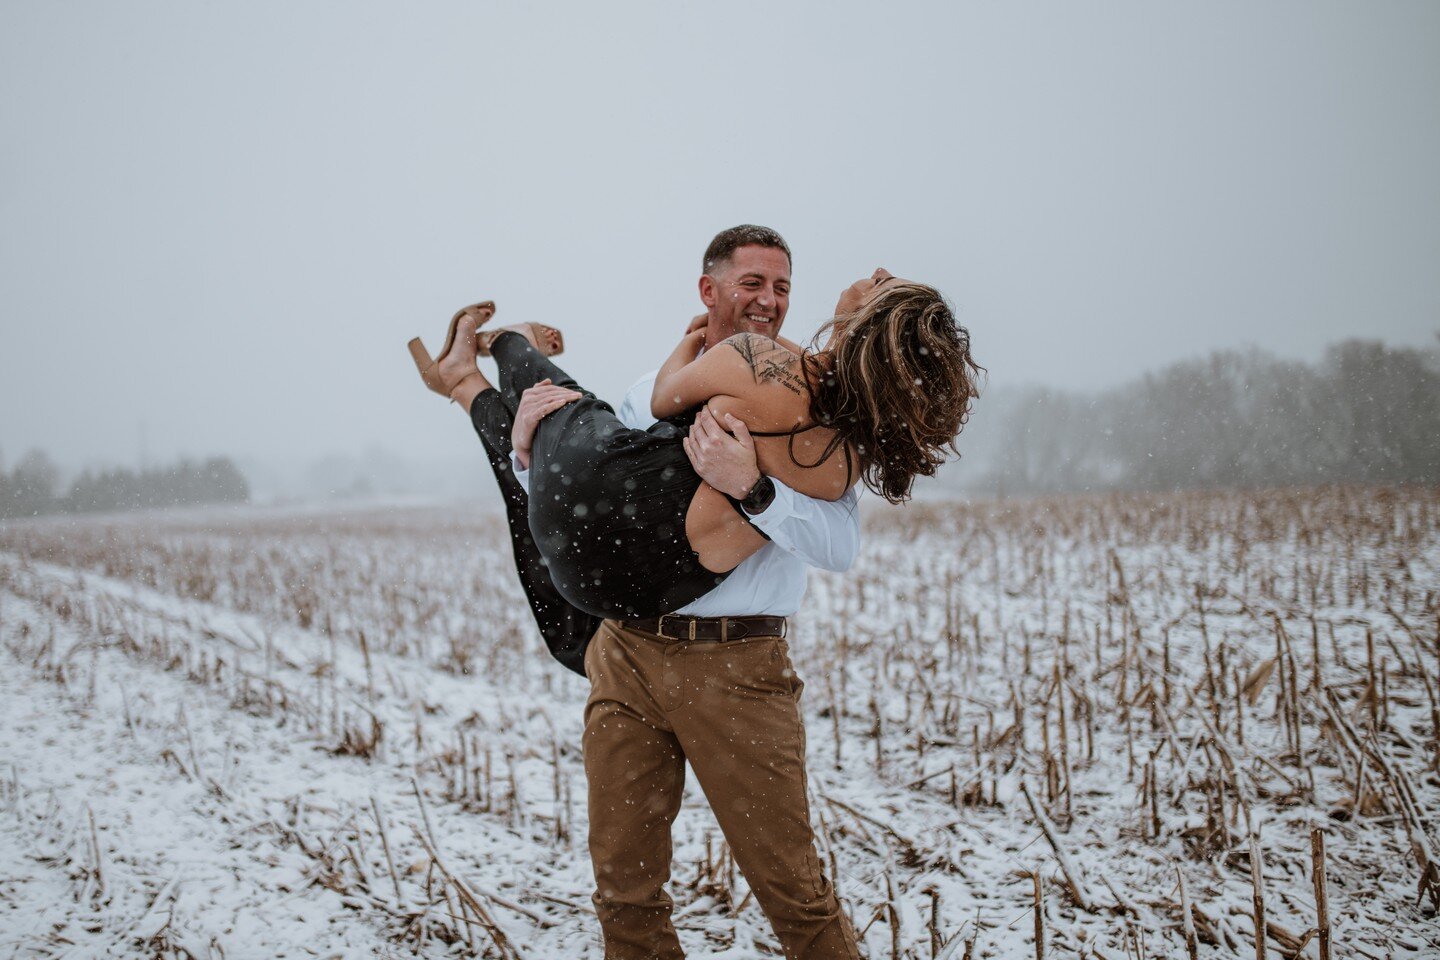 To the couples who embrace &quot;less than perfect&quot; weather&mdash;it's *so* freaking worth it.

Sneak peek from E + C's engagement session this evening. It was windy, snowy, and cold but OH MY LANTA the photos&mdash;I'm screamingggggg.